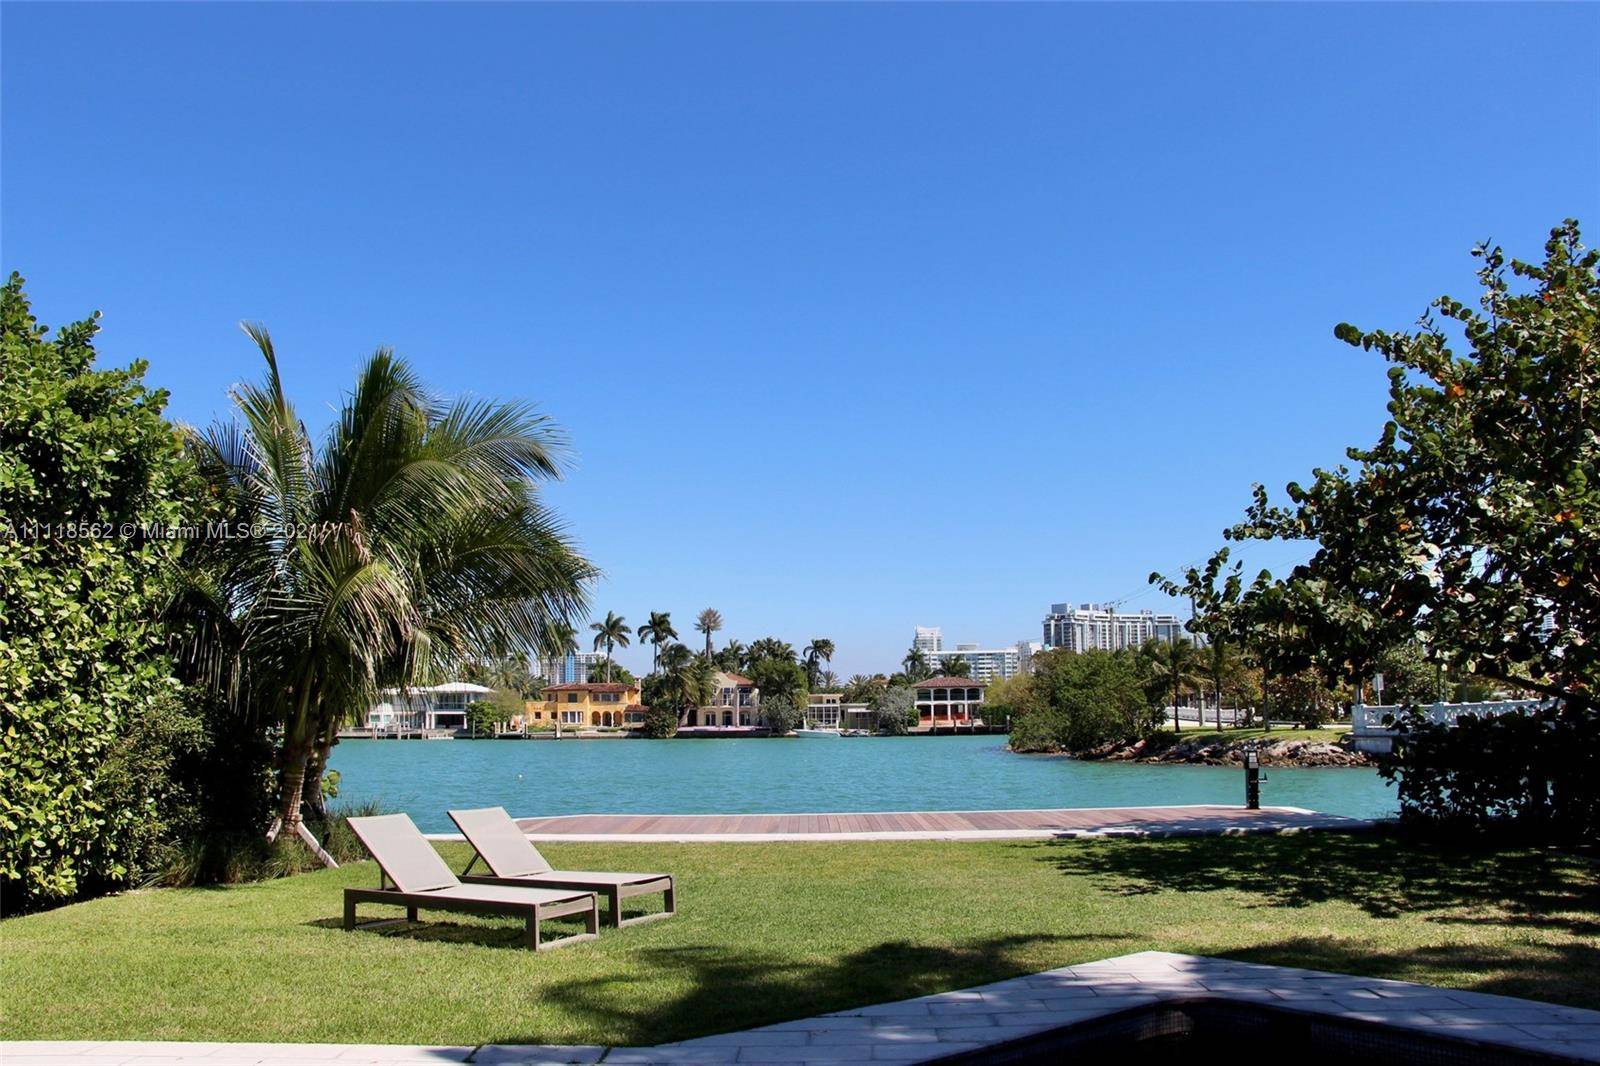 Enjoy the delights of waterfront living on the Venetian Islands in this Tropical Modern Gem !